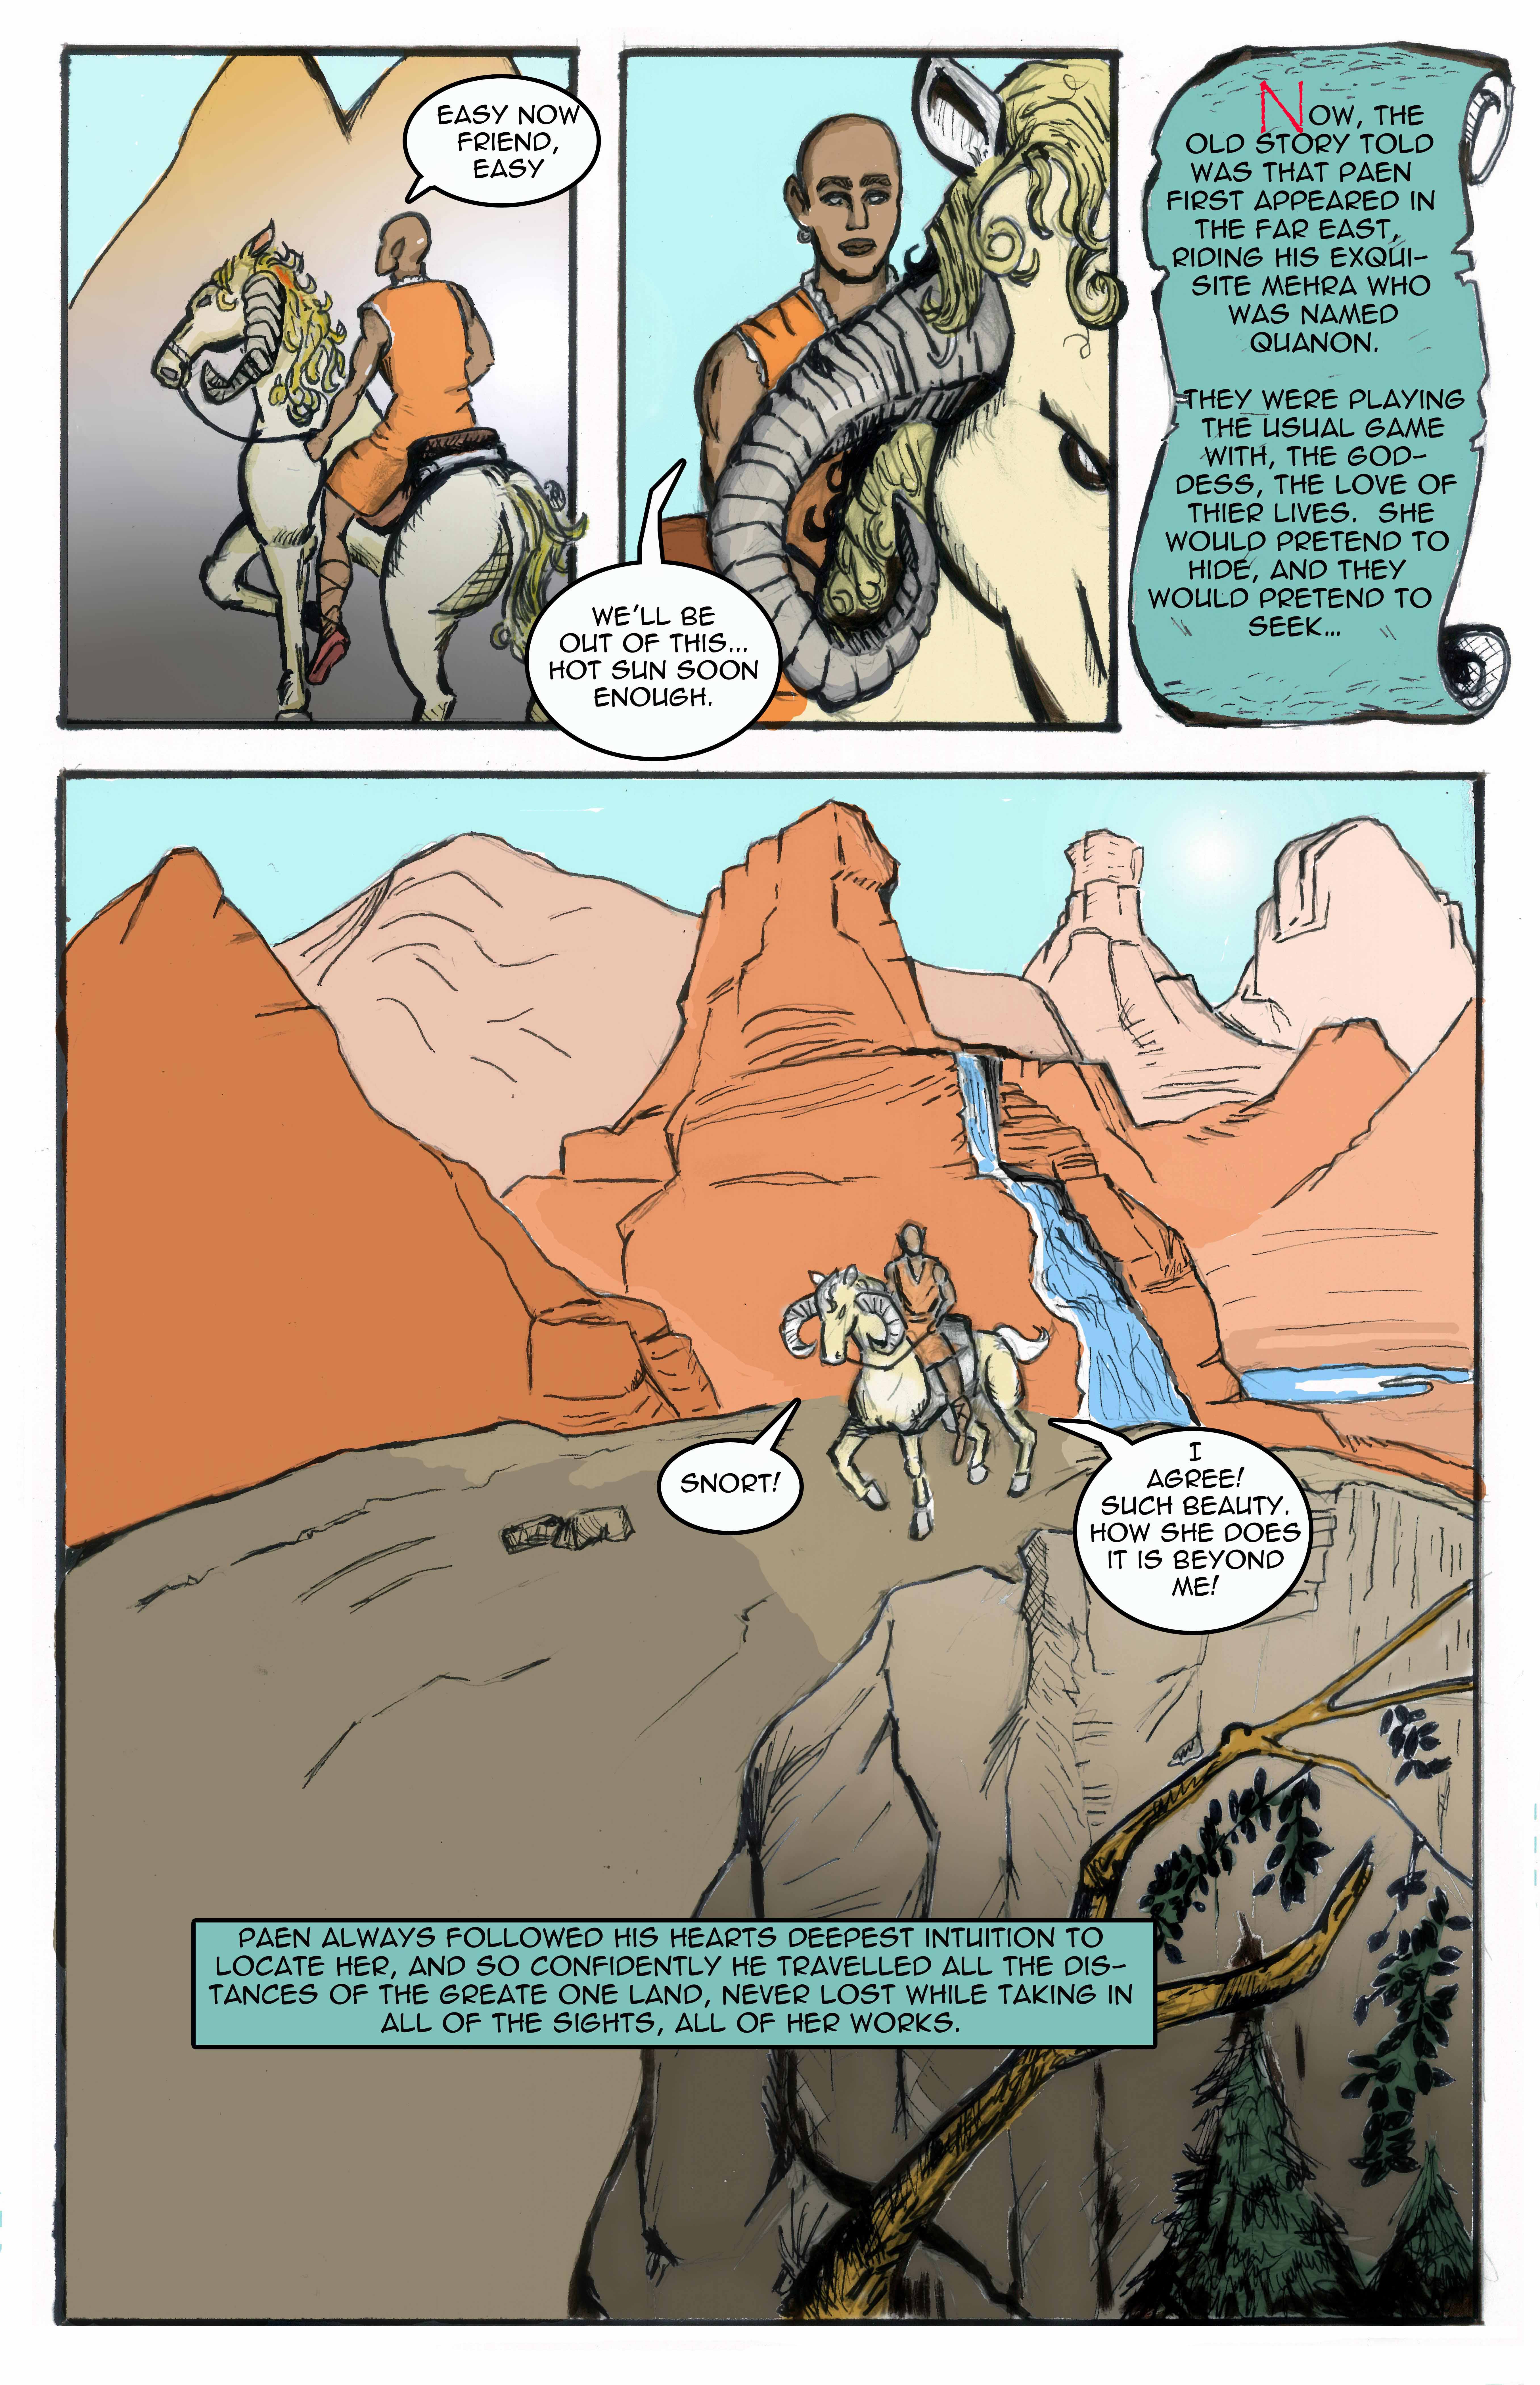 Dreamers of the Great One Land (page 14)